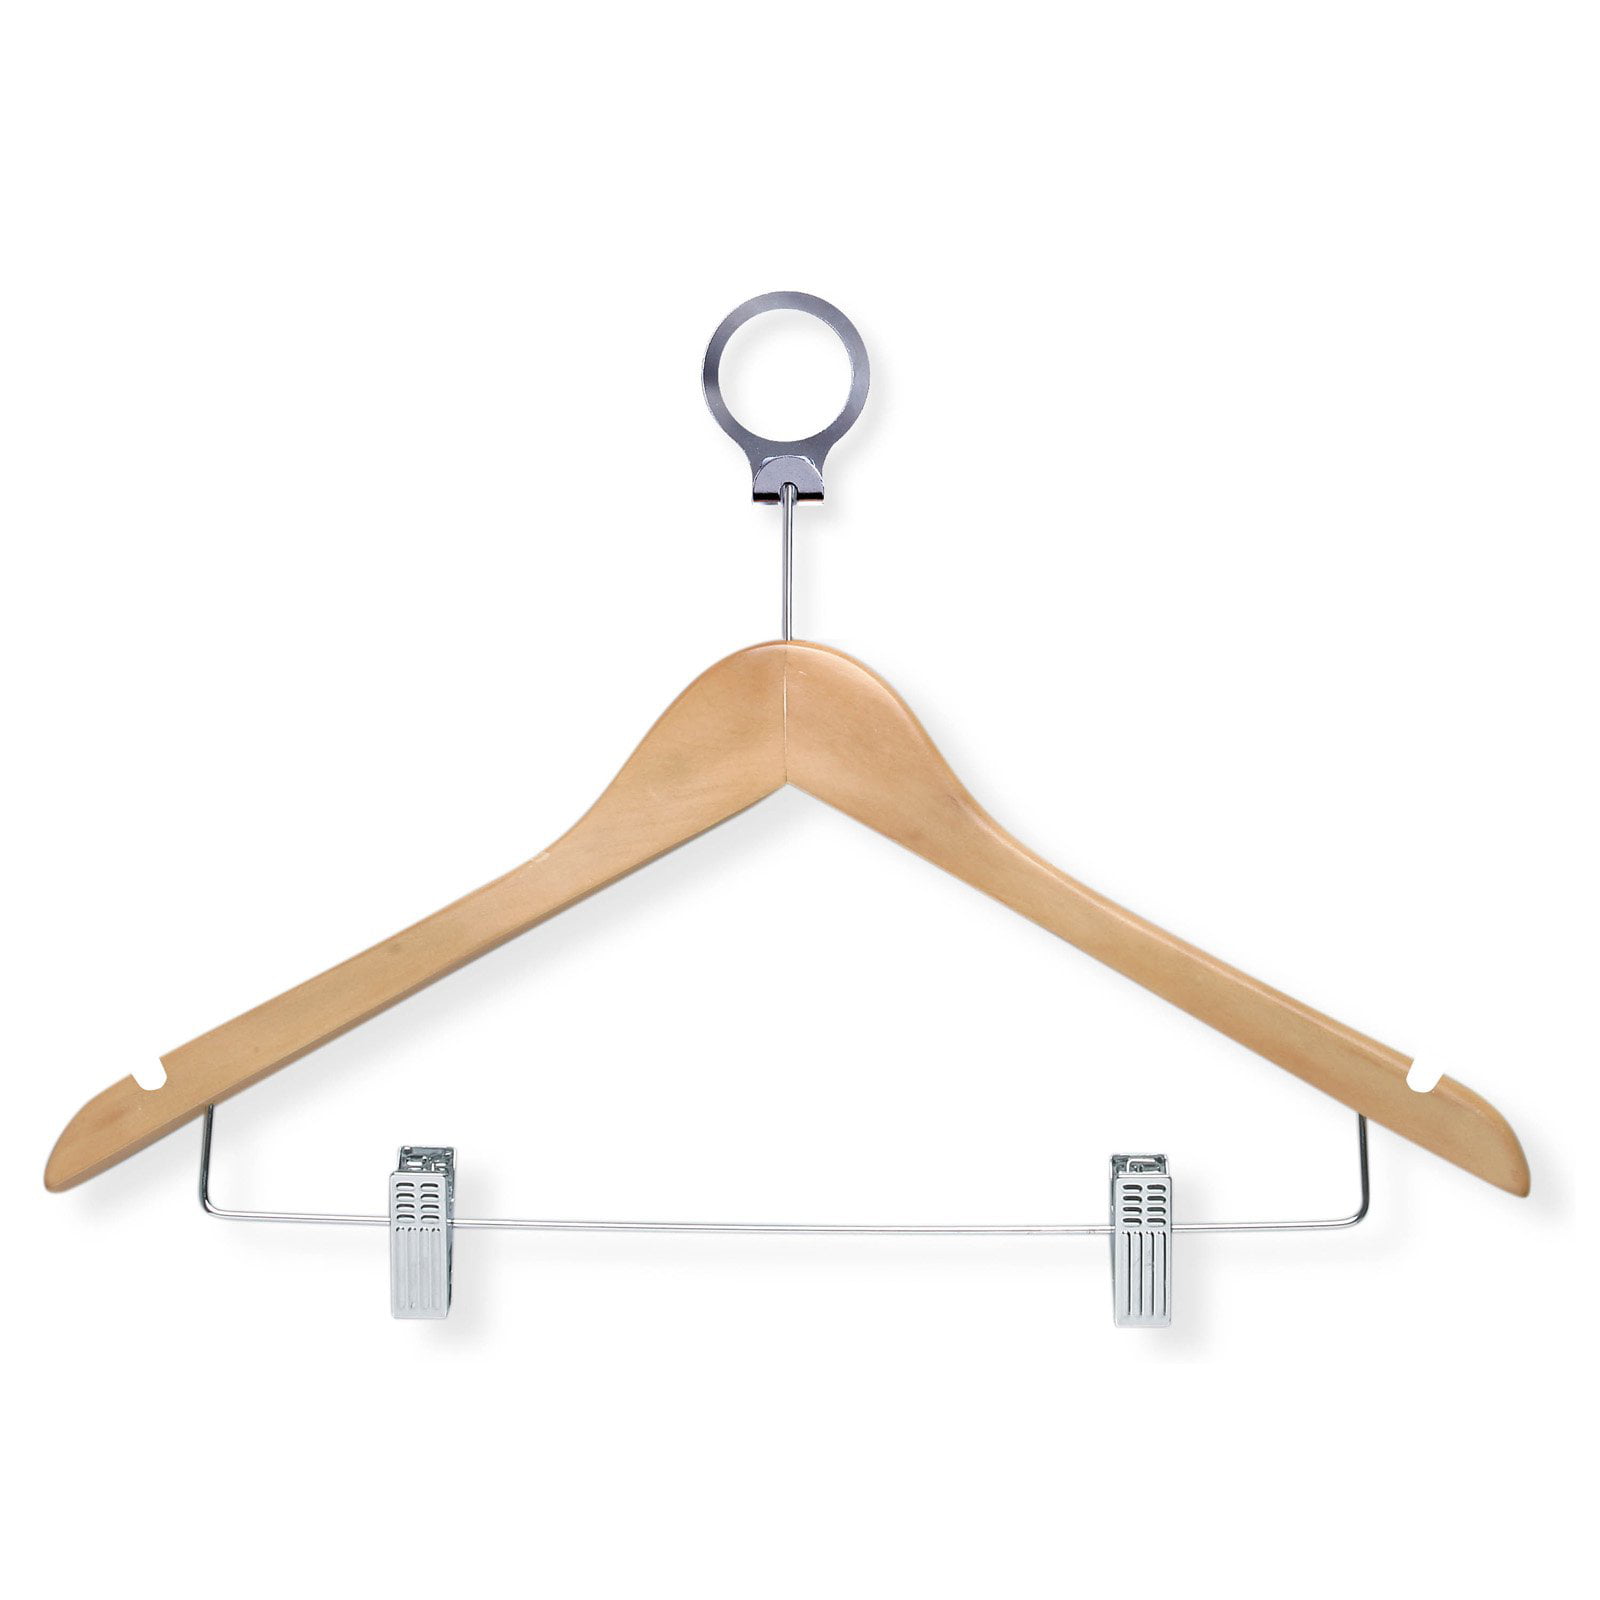 OSTO Natural Wooden Kids Clothes Hangers (10-Pack) OW-124-10-NAT-H - The  Home Depot